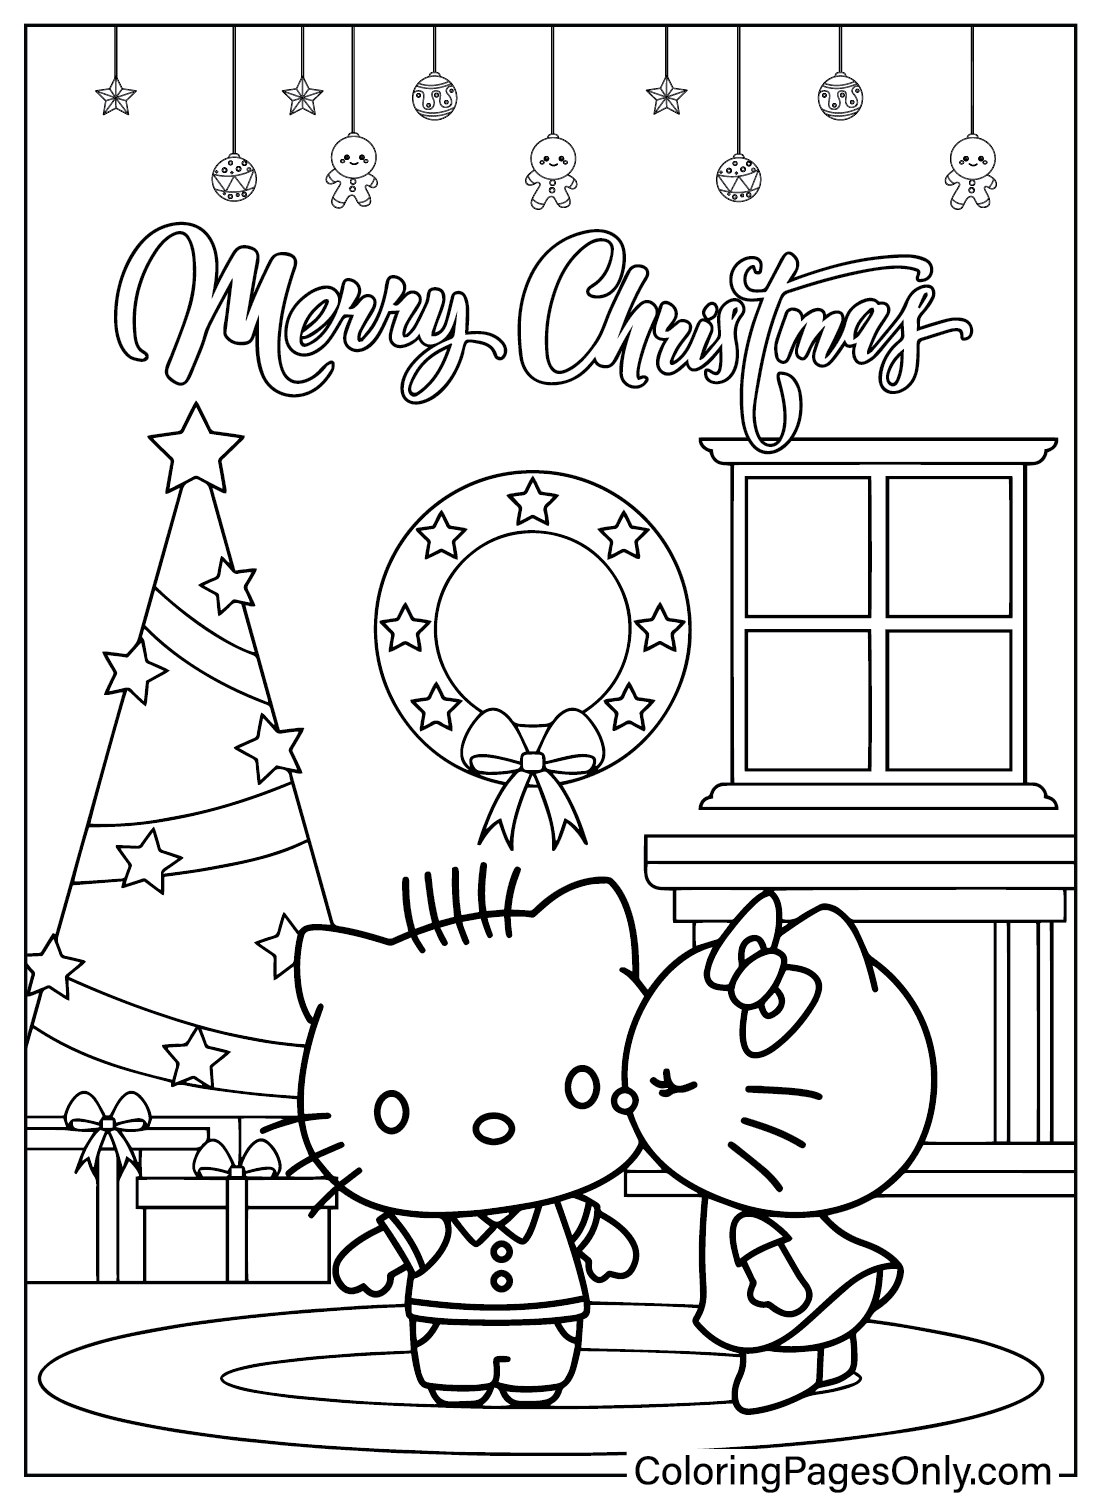 Hello Kitty Coloring Page for Adults